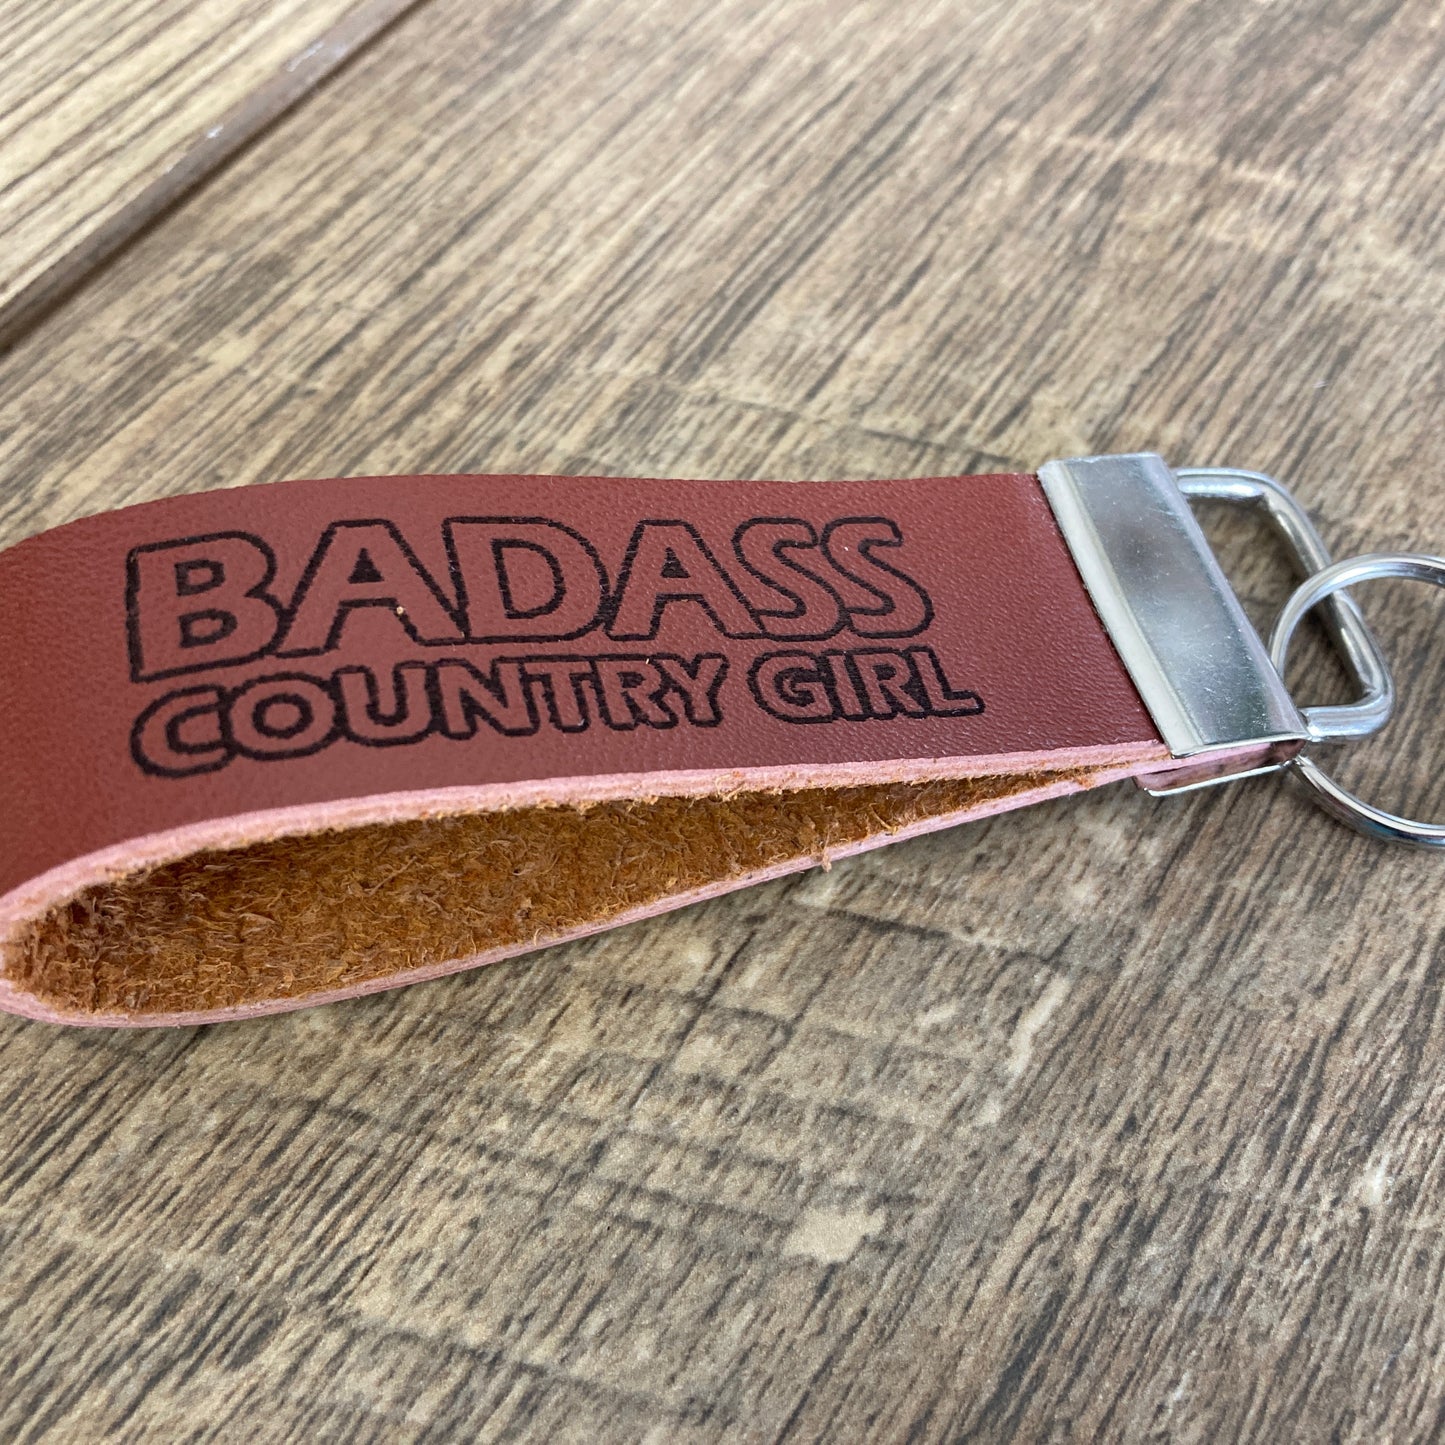 Badass Country Girl (Outlined) Leather Keychain